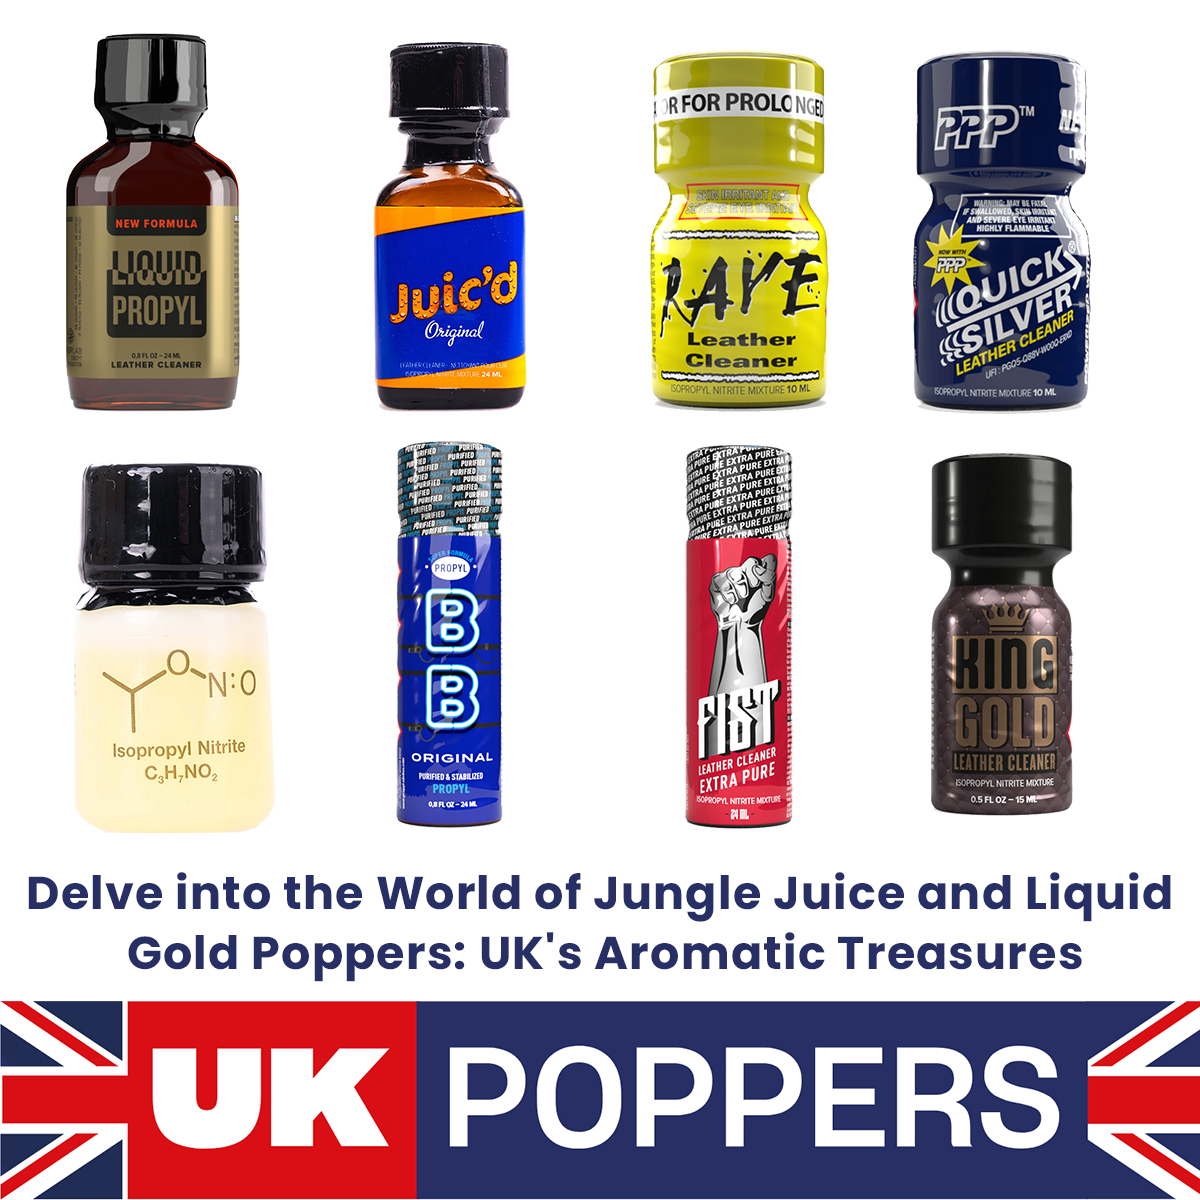 Delve into the World of Jungle Juice and Liquid Gold Poppers: UK's Aromatic Treasures